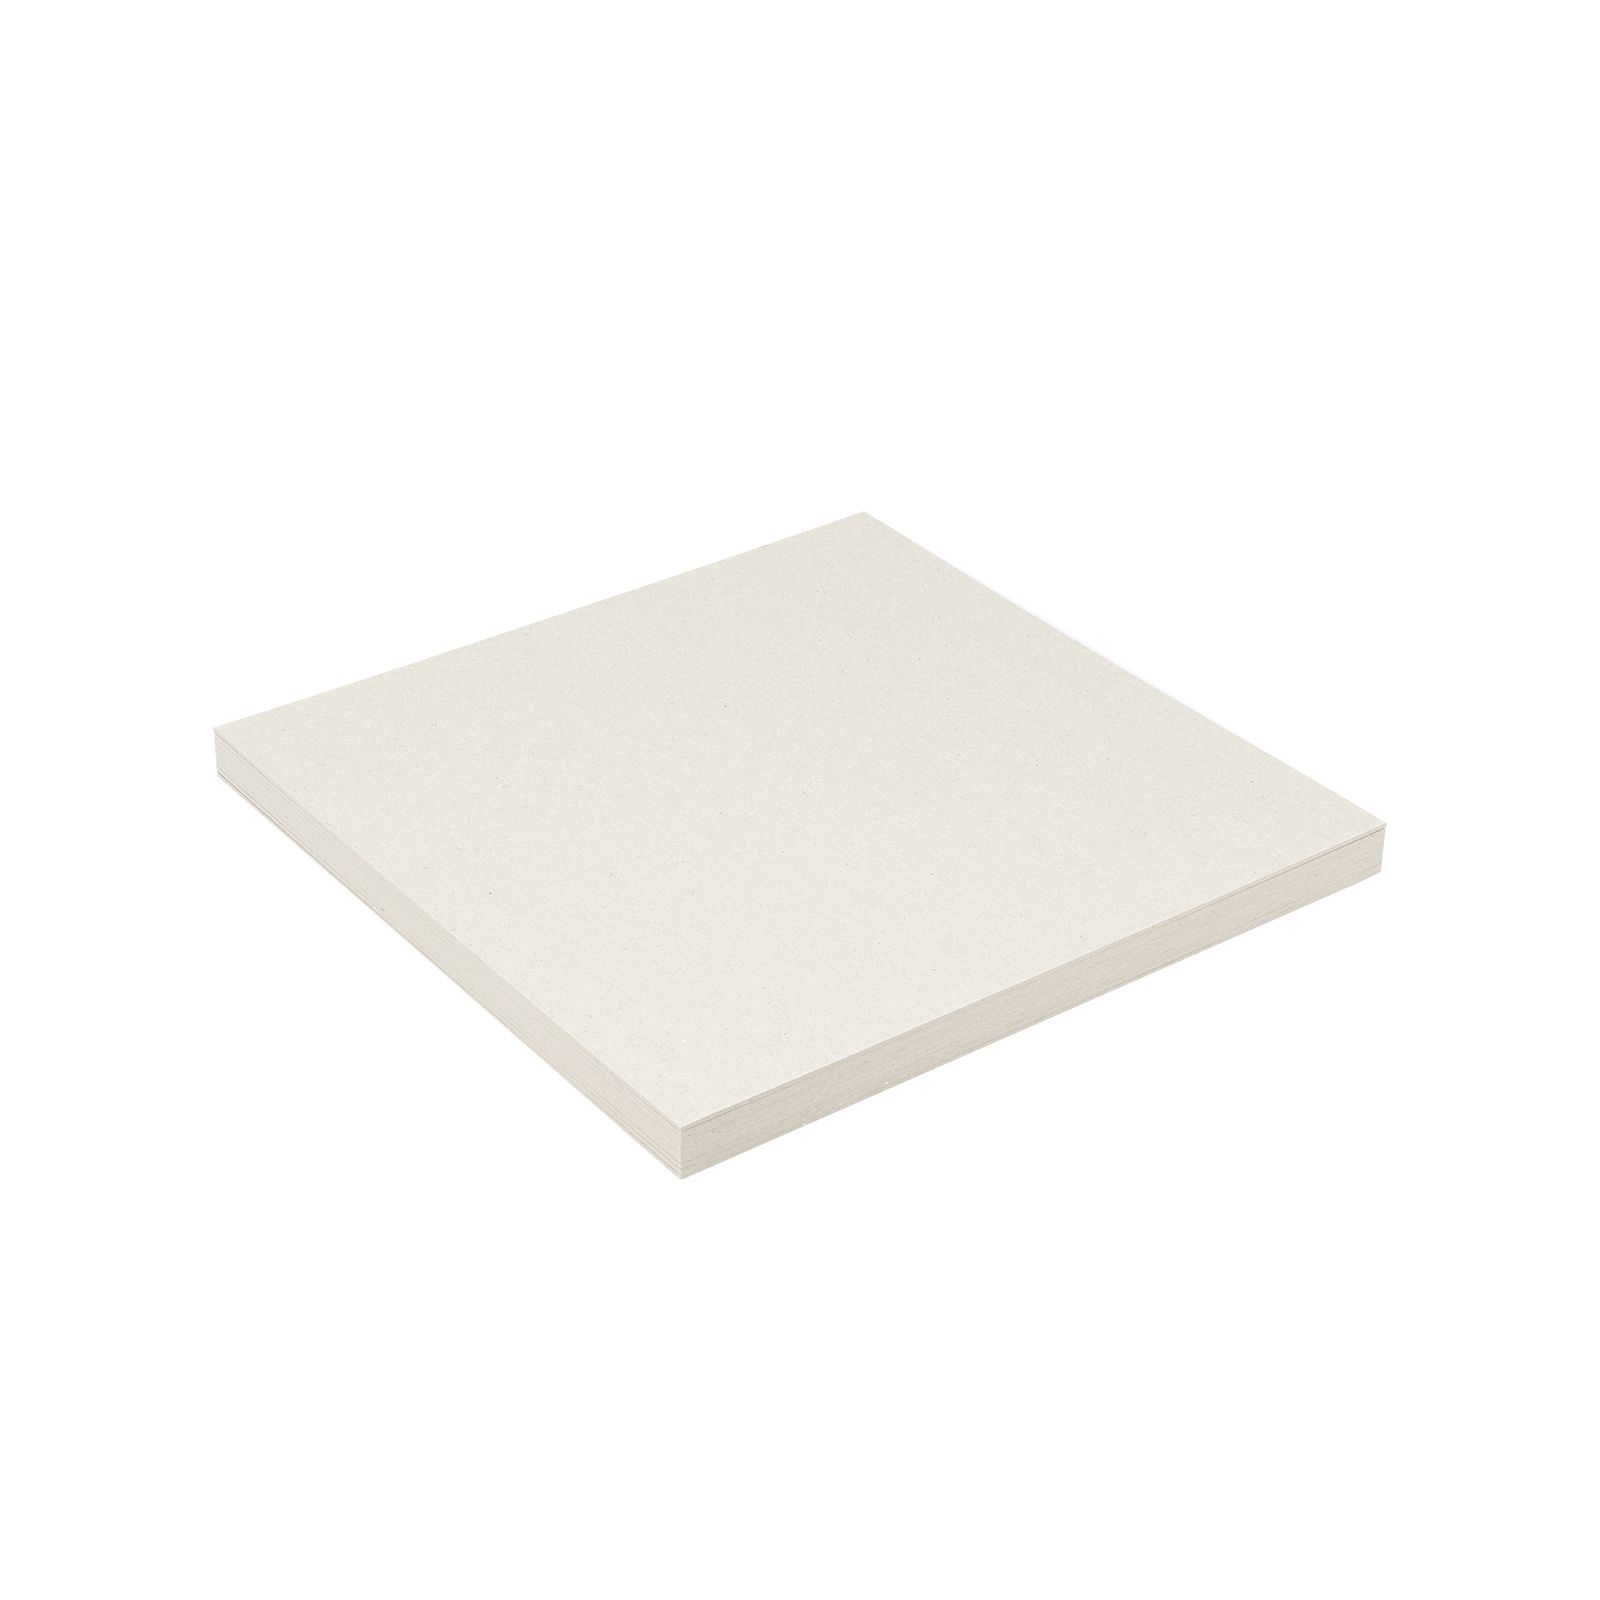 Florence • Graupappe 2mm 30,5x30,5cm 10x